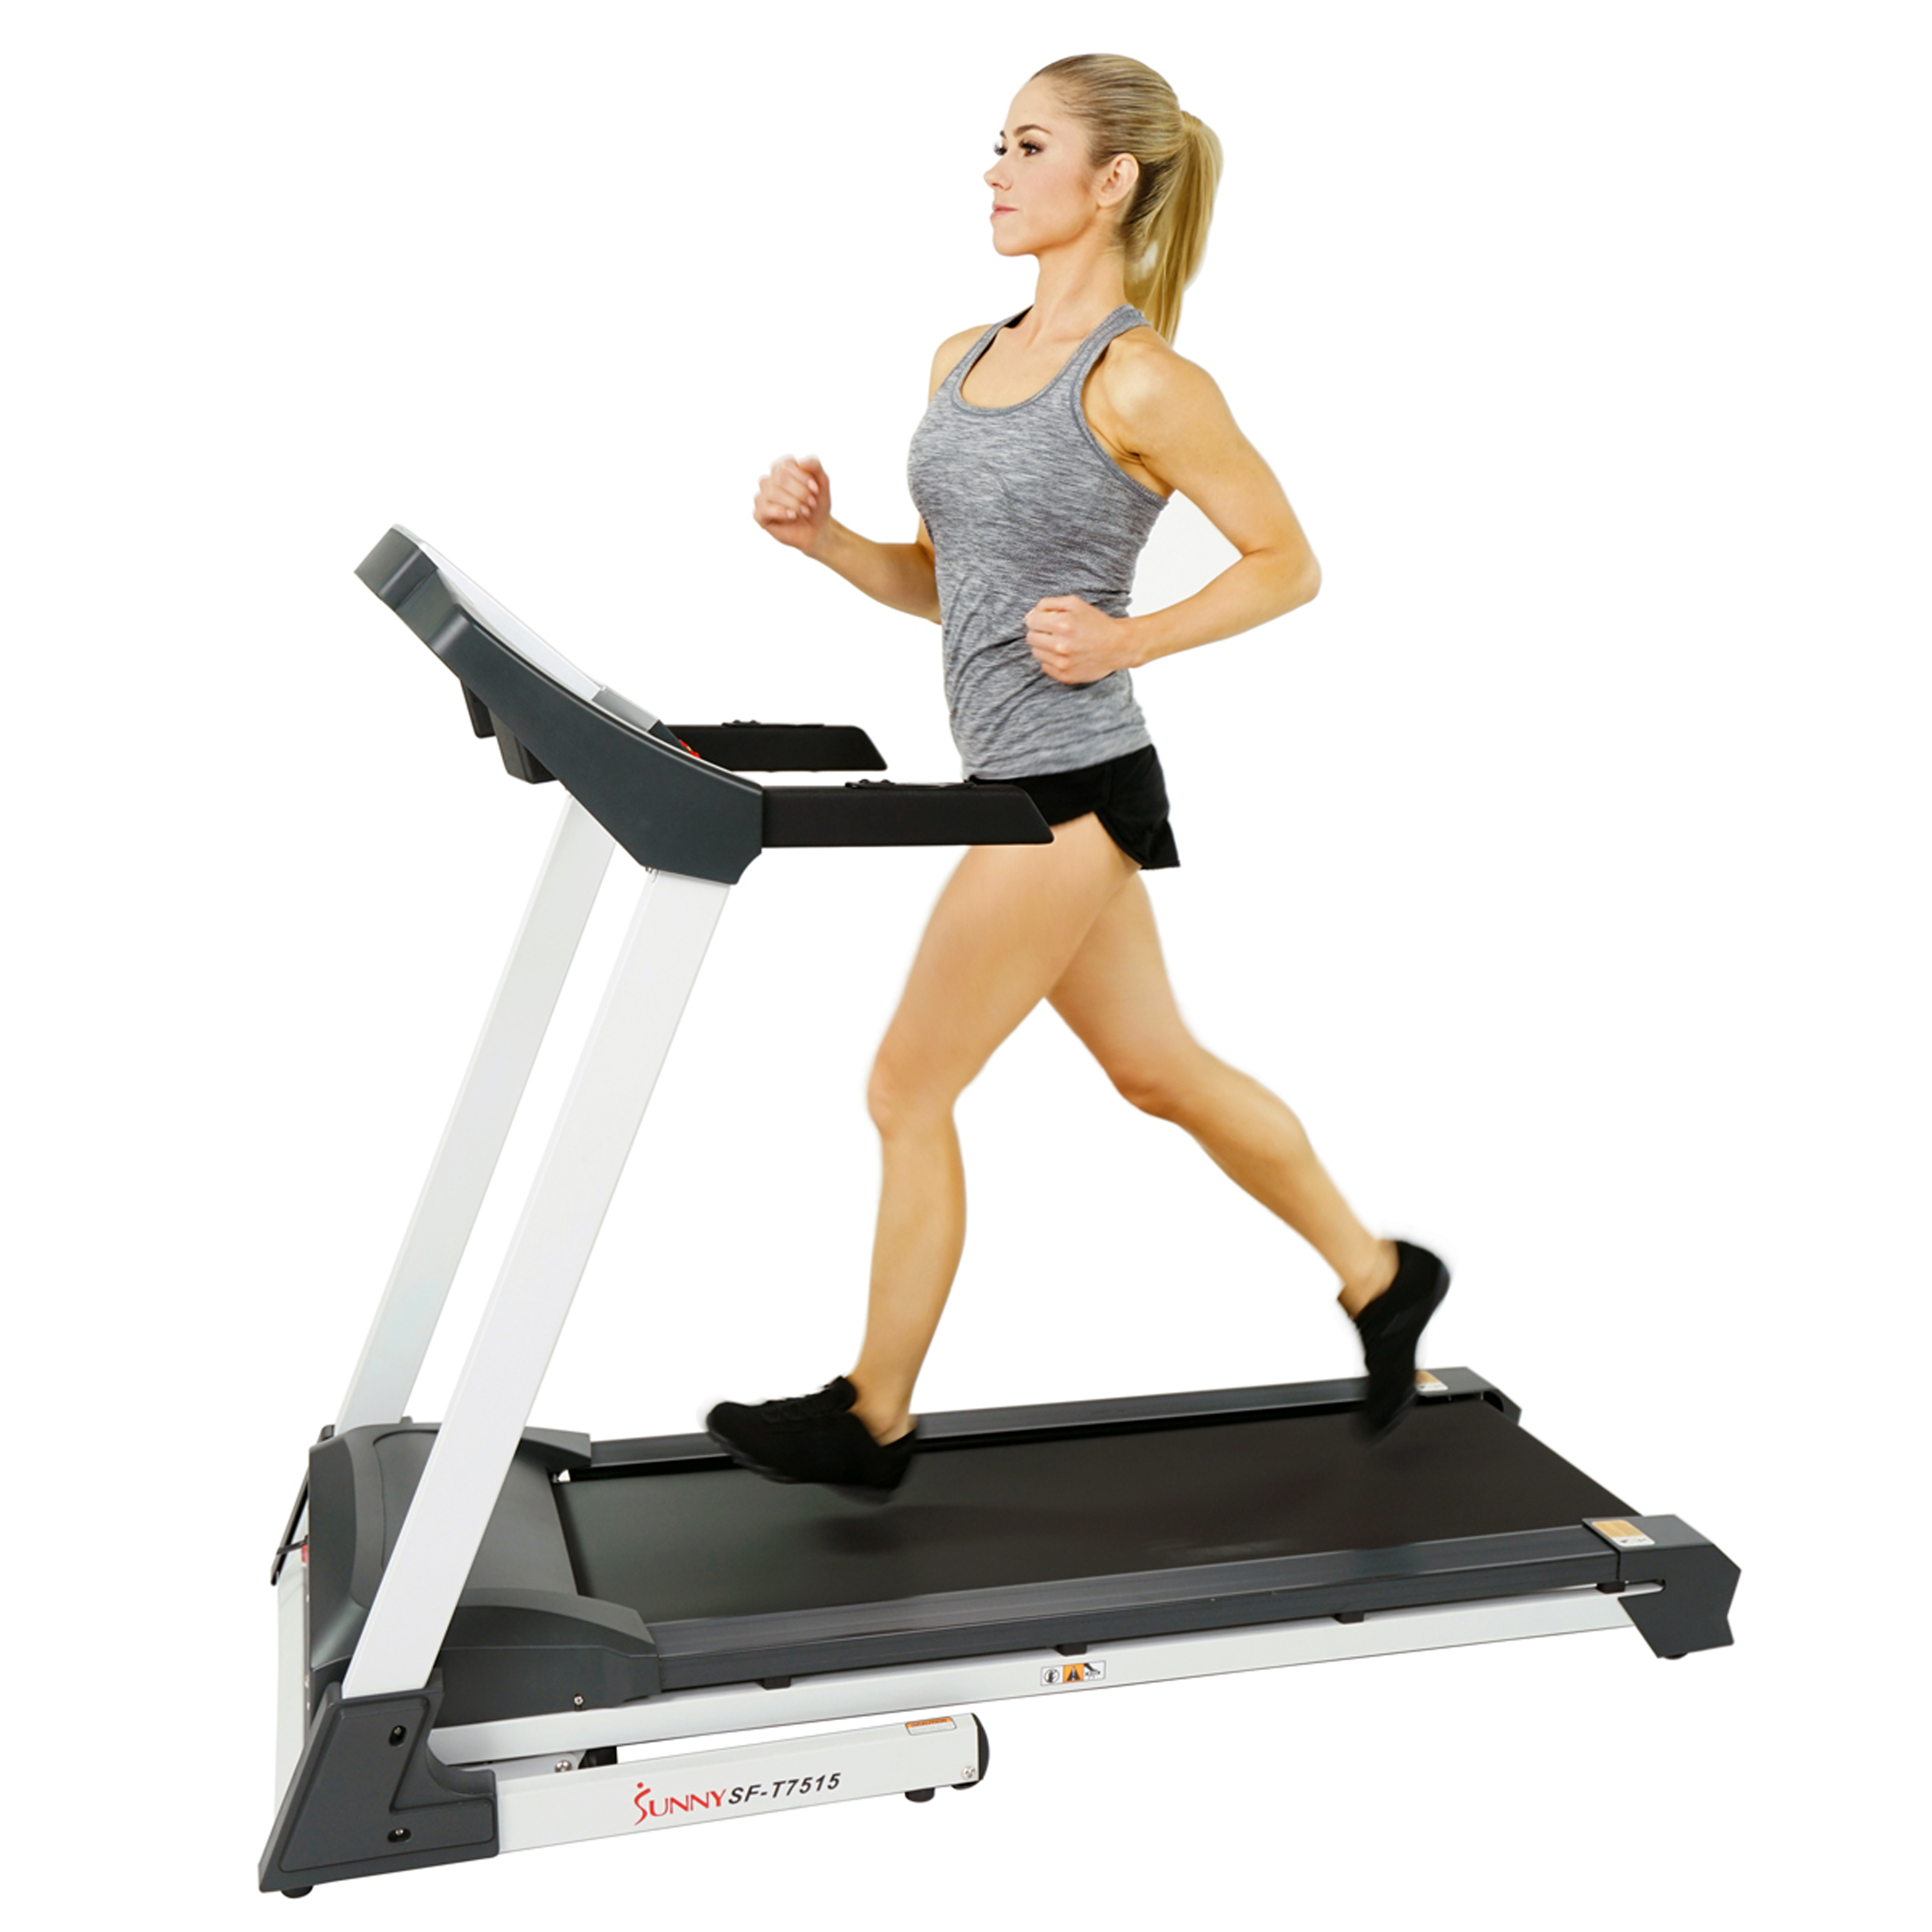 Sunny Health & Fitness Smart Running Treadmill w/ Auto Incline, Sound System, Bluetooth, Foldable, High Weight Capacity, SF-T7515 - image 1 of 10